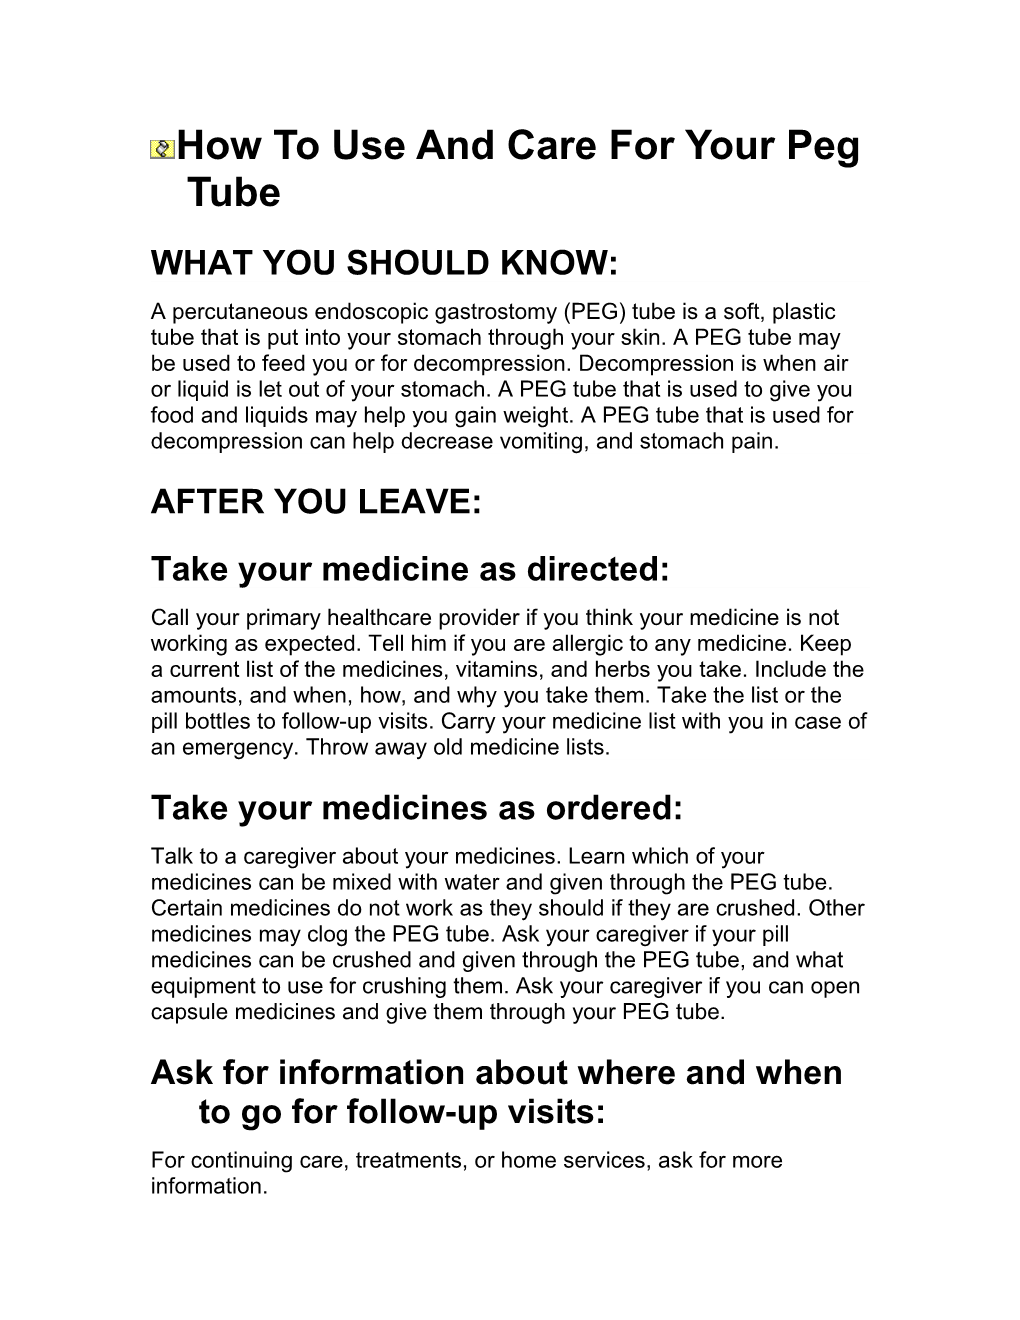 How to Use and Care for Your Peg Tube